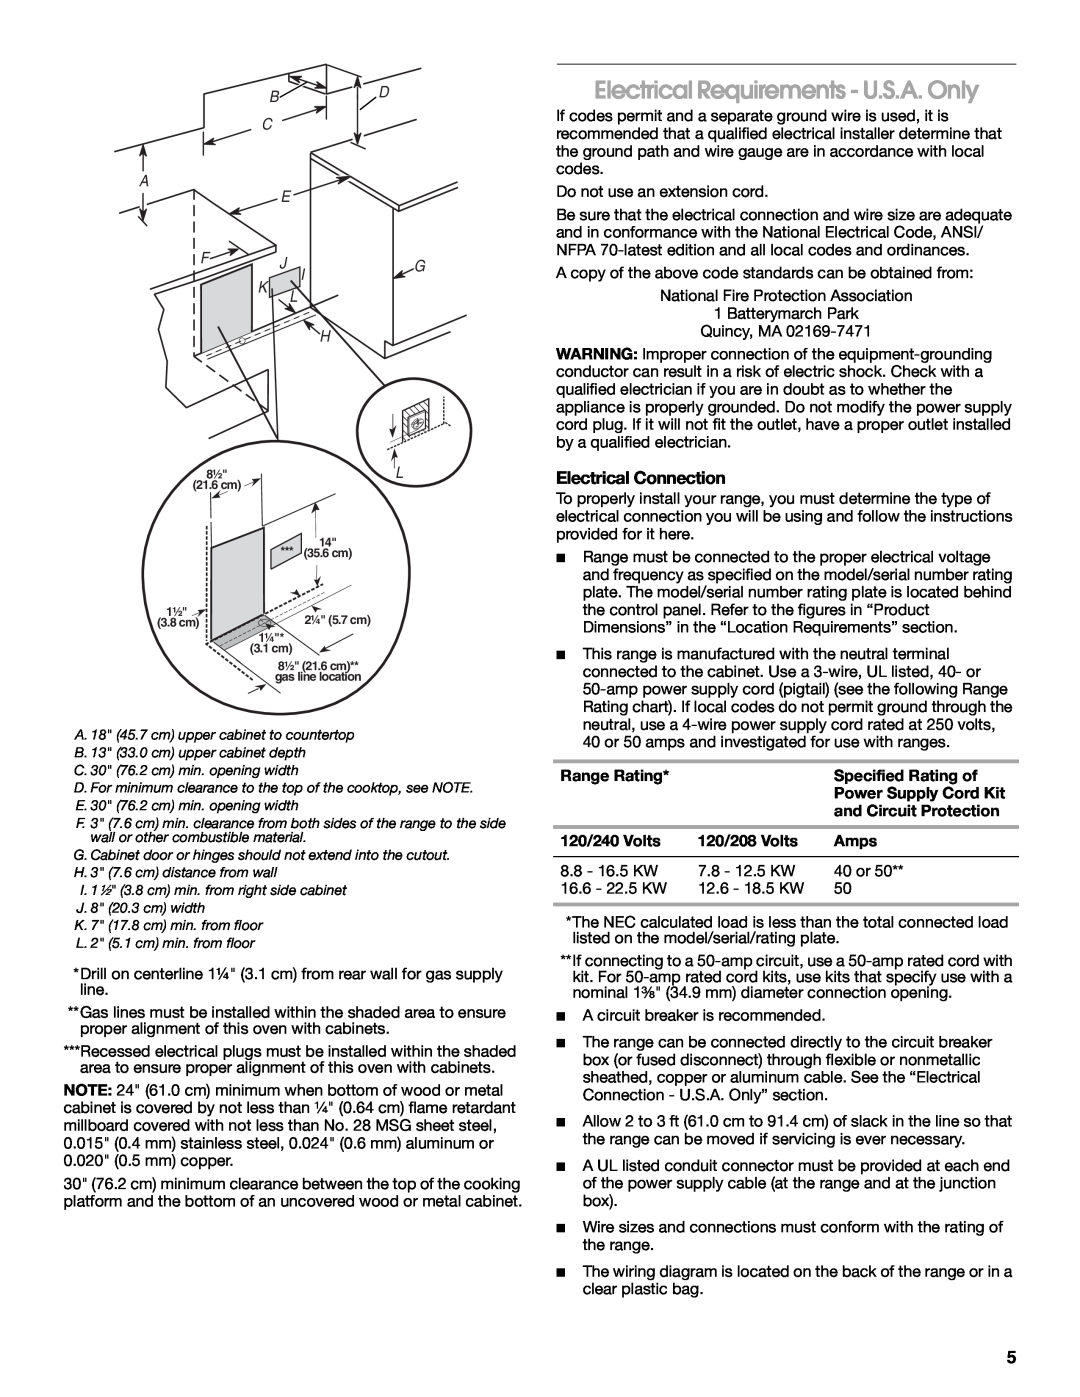 KitchenAid W10526086A Electrical Requirements - U.S.A. Only, Electrical Connection, Range Rating, Specified Rating of 